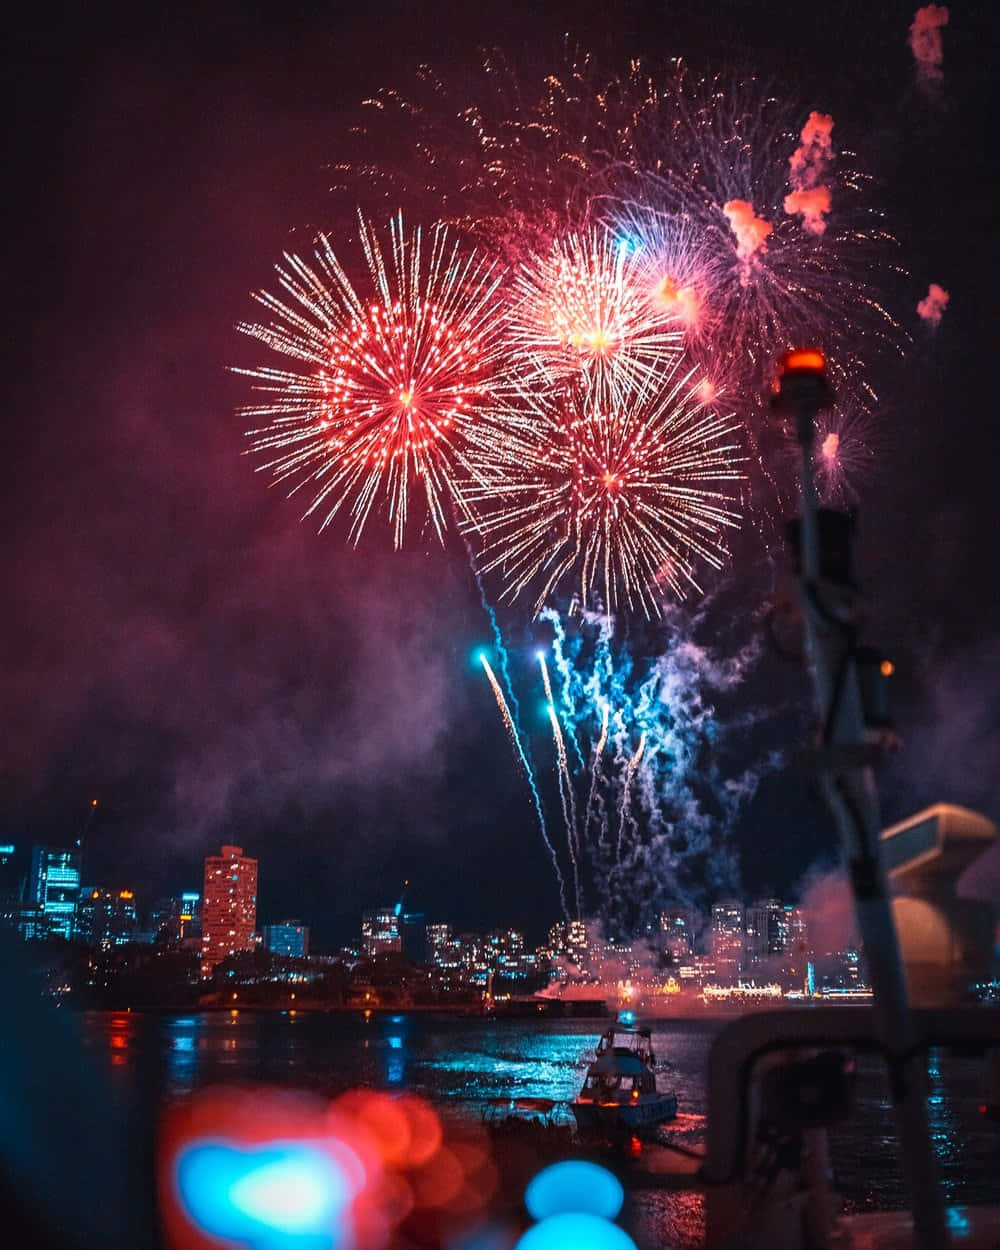 Fireworks Over A City With A Boat In The Background Wallpaper